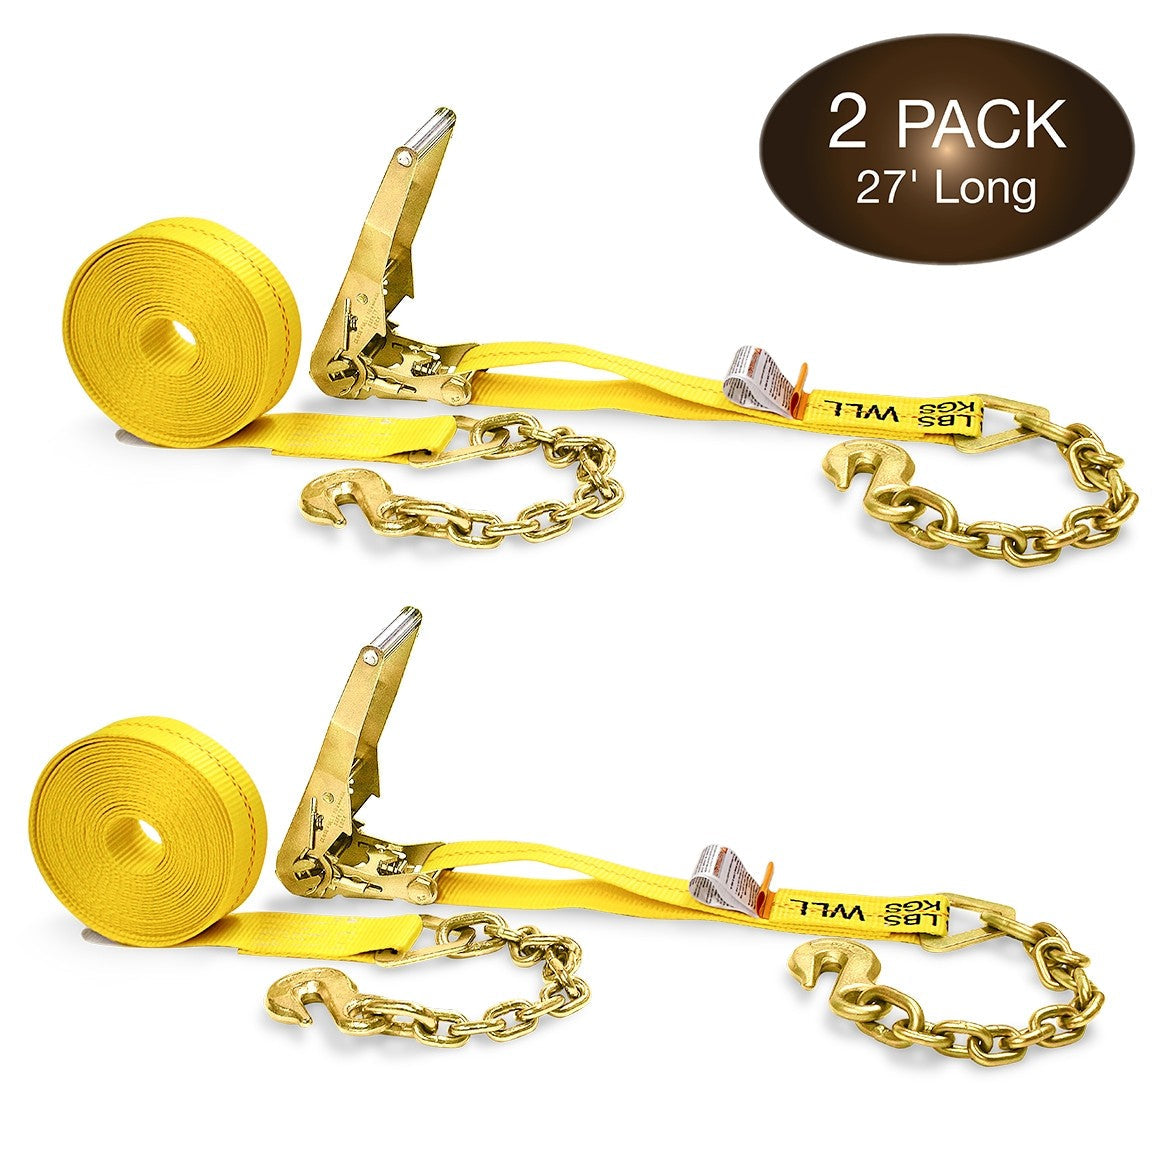 DC Cargo Bolt-On Auto-Retract Ratchet Strap with E-Track Adapter, 2x10',  2-pack at Tractor Supply Co.